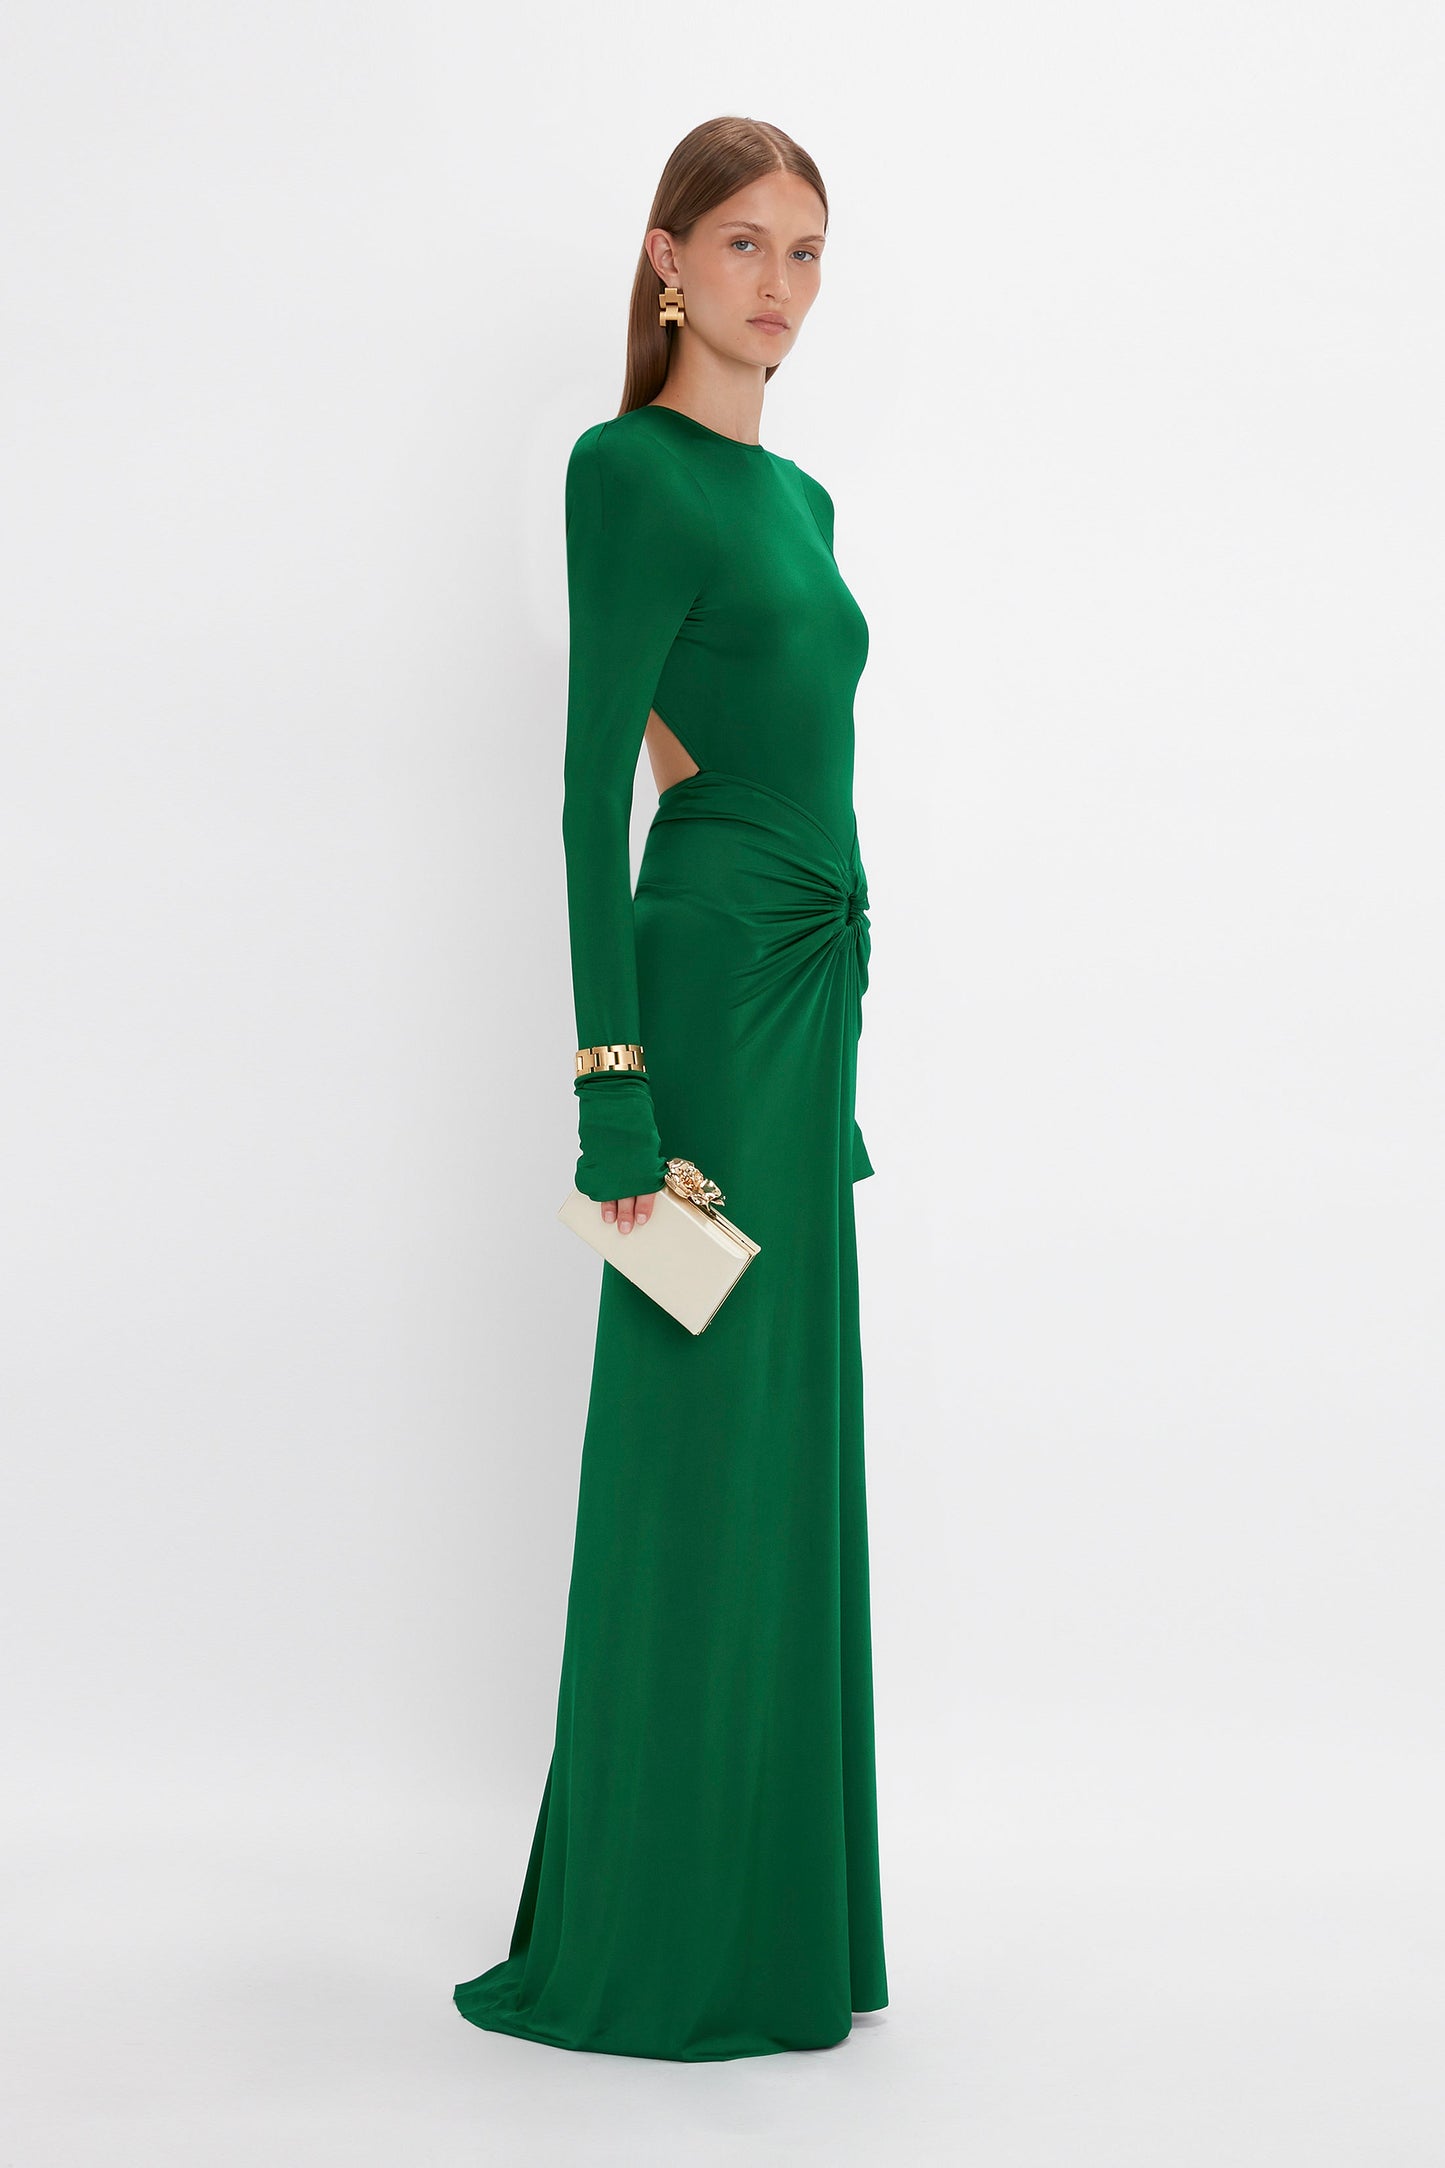 Woman in a **Victoria Beckham** **Circle Detail Open Back Gown In Emerald**, featuring side cut-outs and a knotted detail at the waist, with a longer-length hem. She holds a white clutch purse and accessorizes with gold earrings and a bracelet.